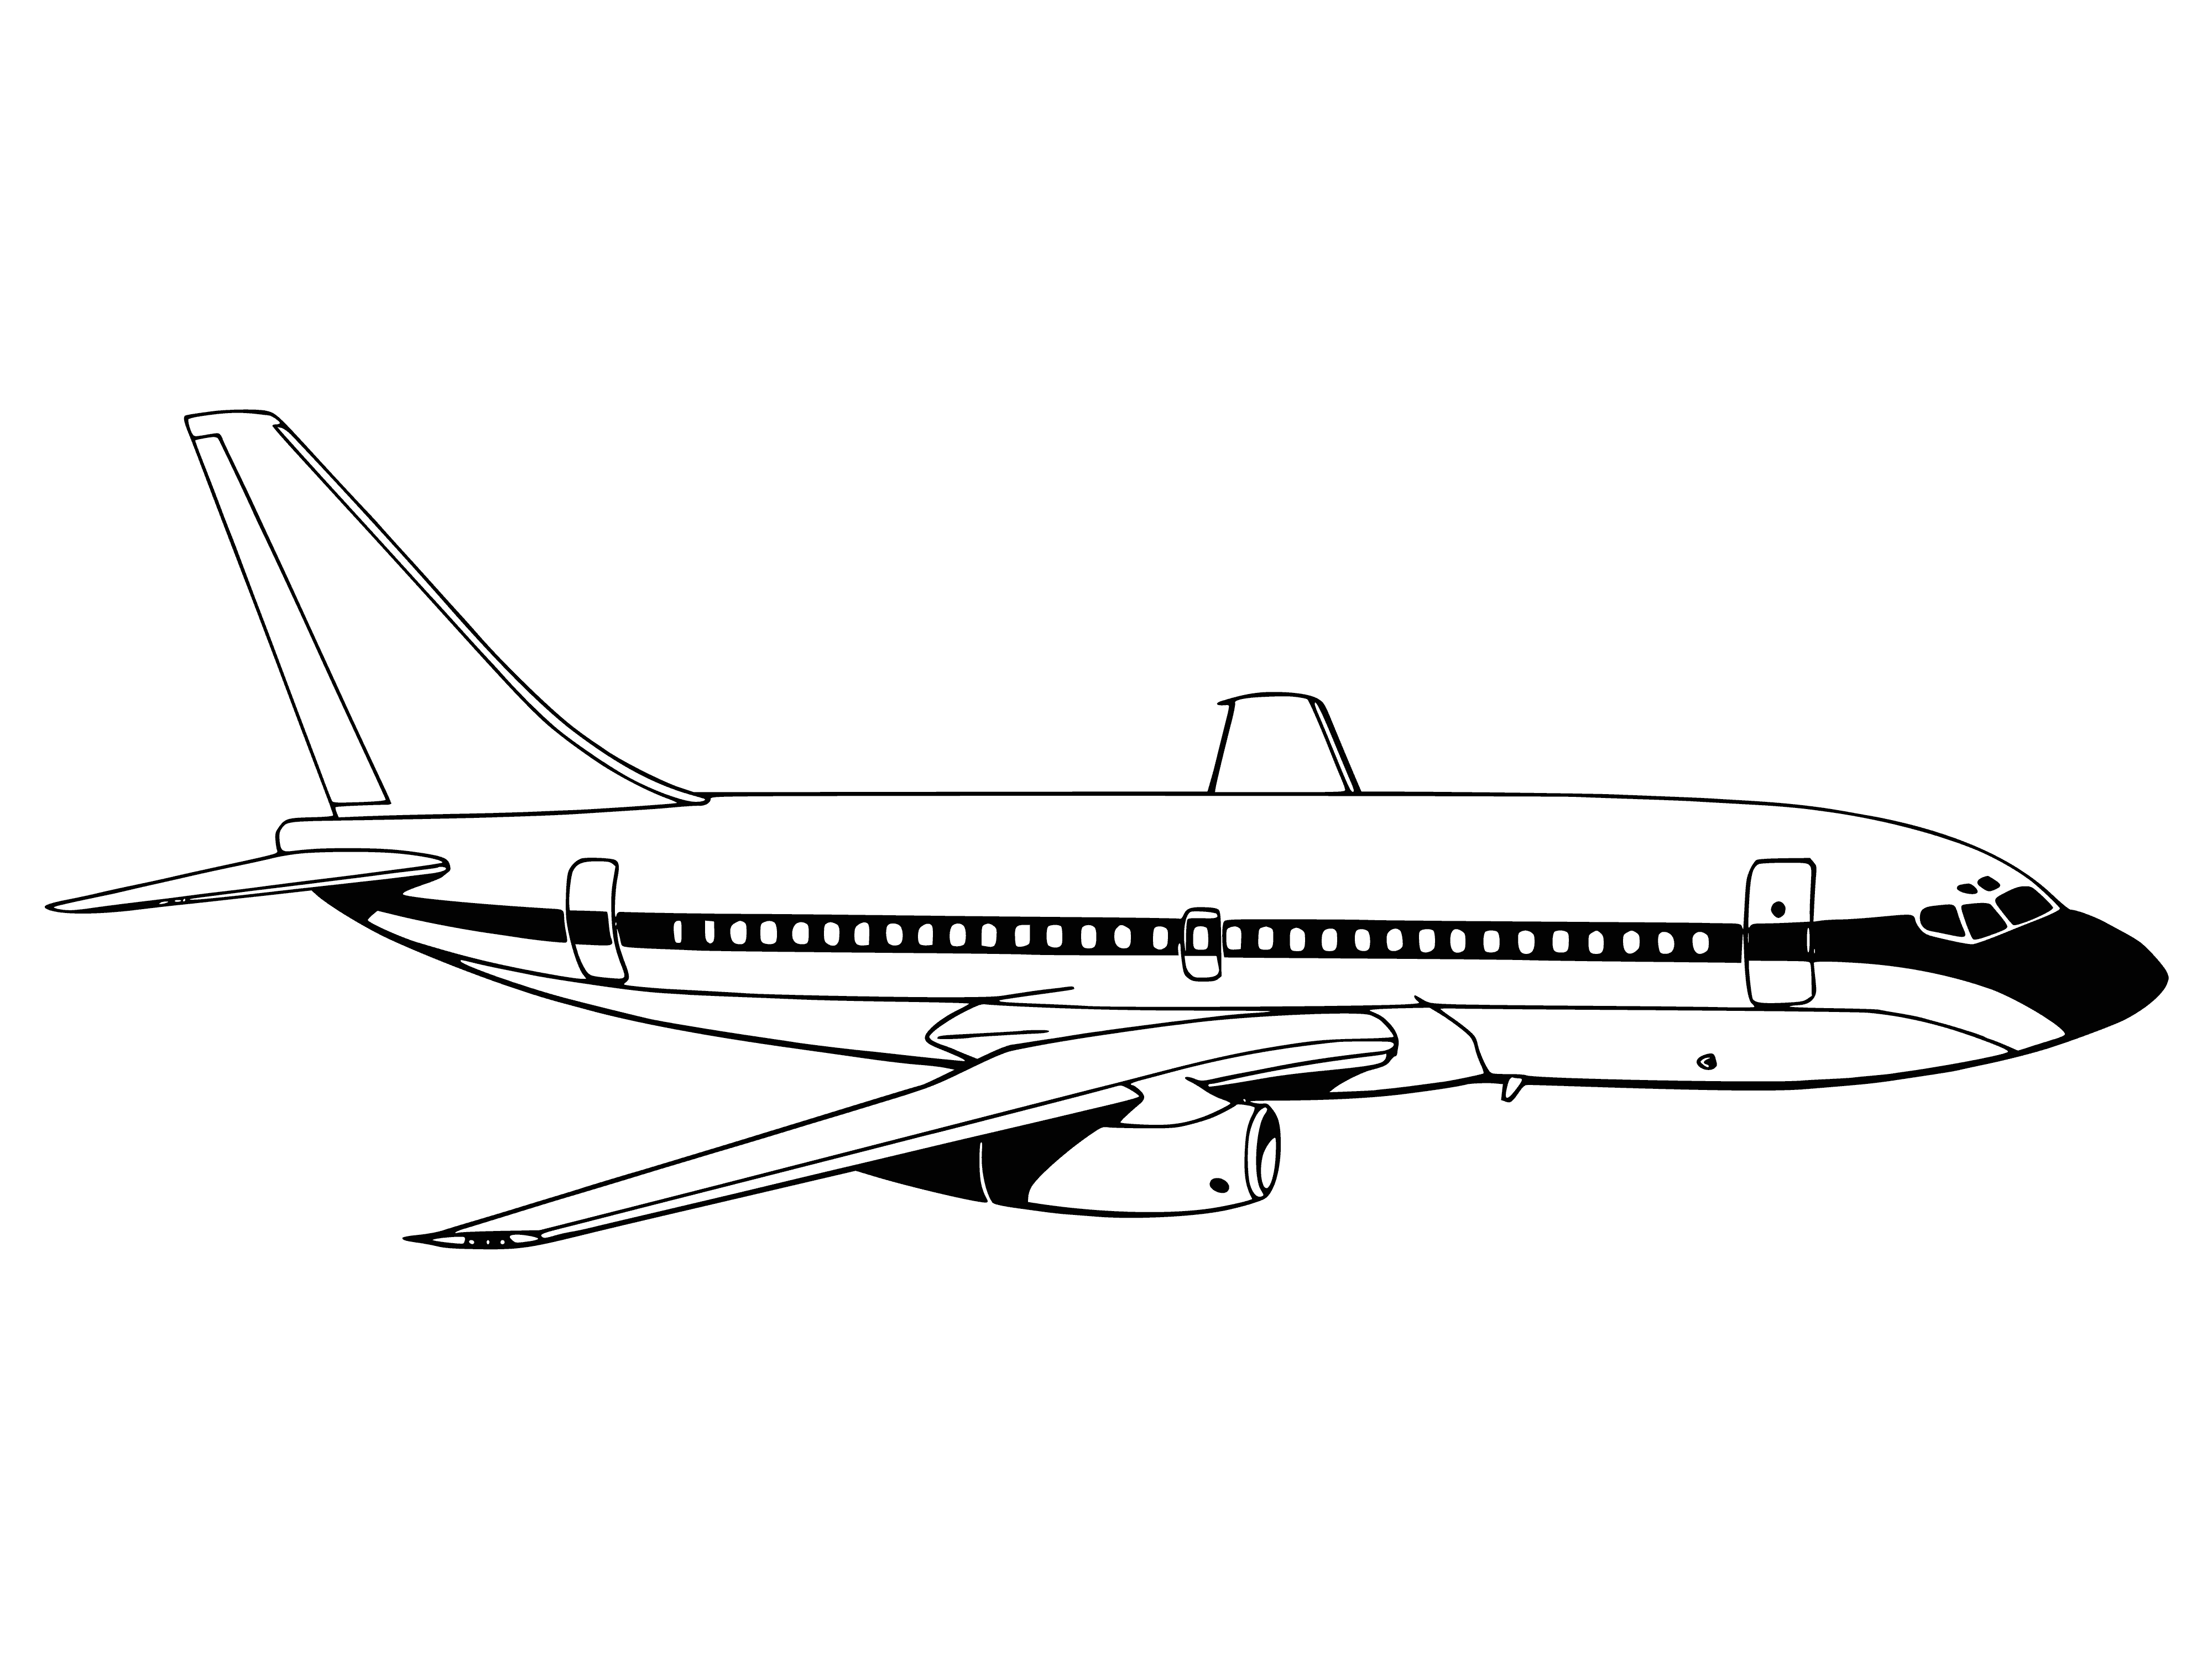 coloring page: A white passenger plane with 2 engines, tall skinny tail, and many windows along the sides. #planes #colorpage